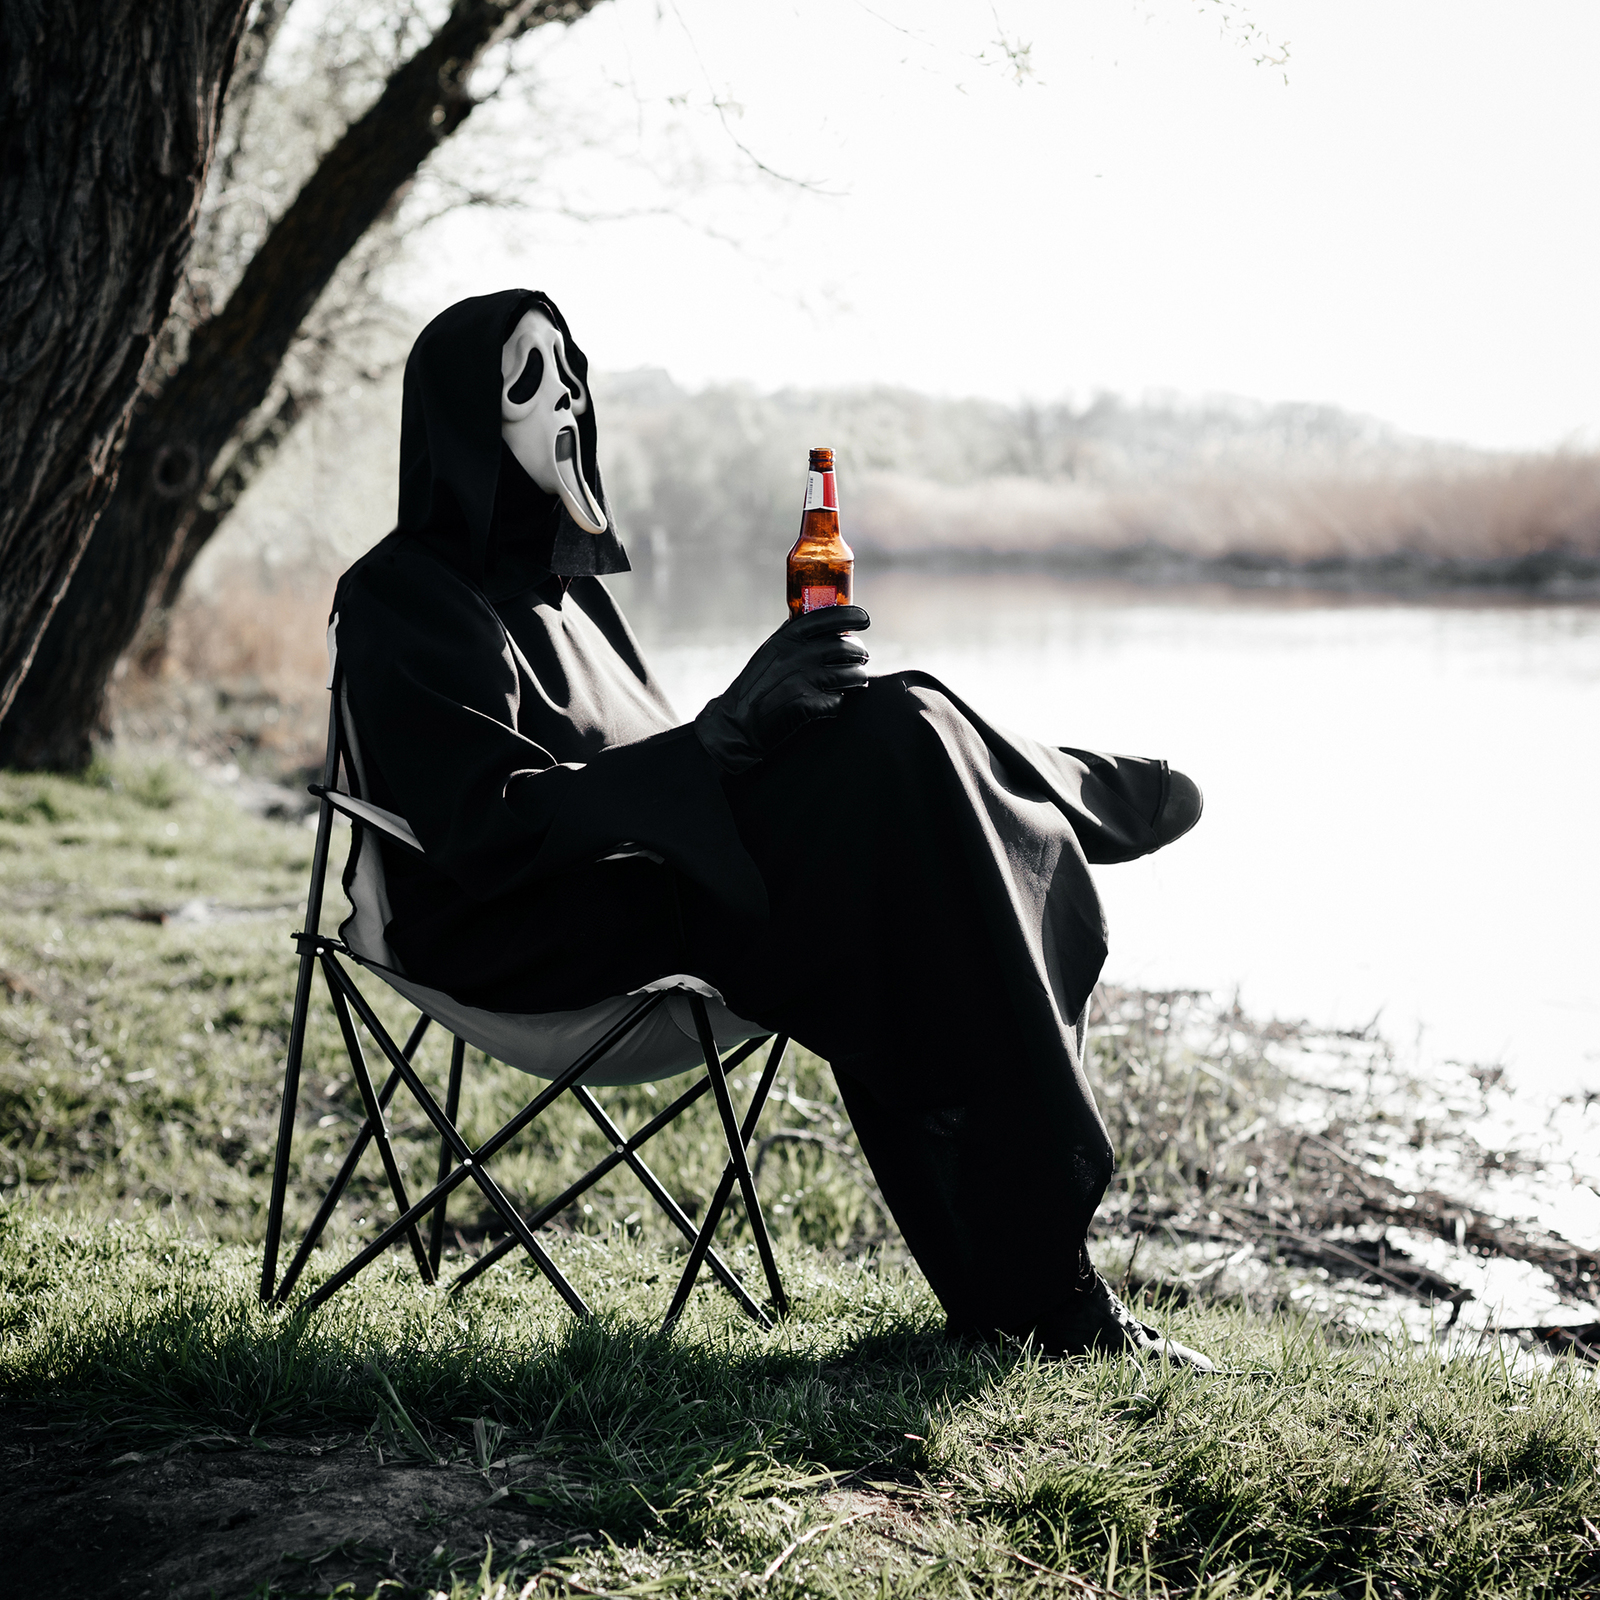 To drink or not to drink - Alcohol, Beer, My, Strange humor, Humor, Bloggers, The photo, Mrscream, My